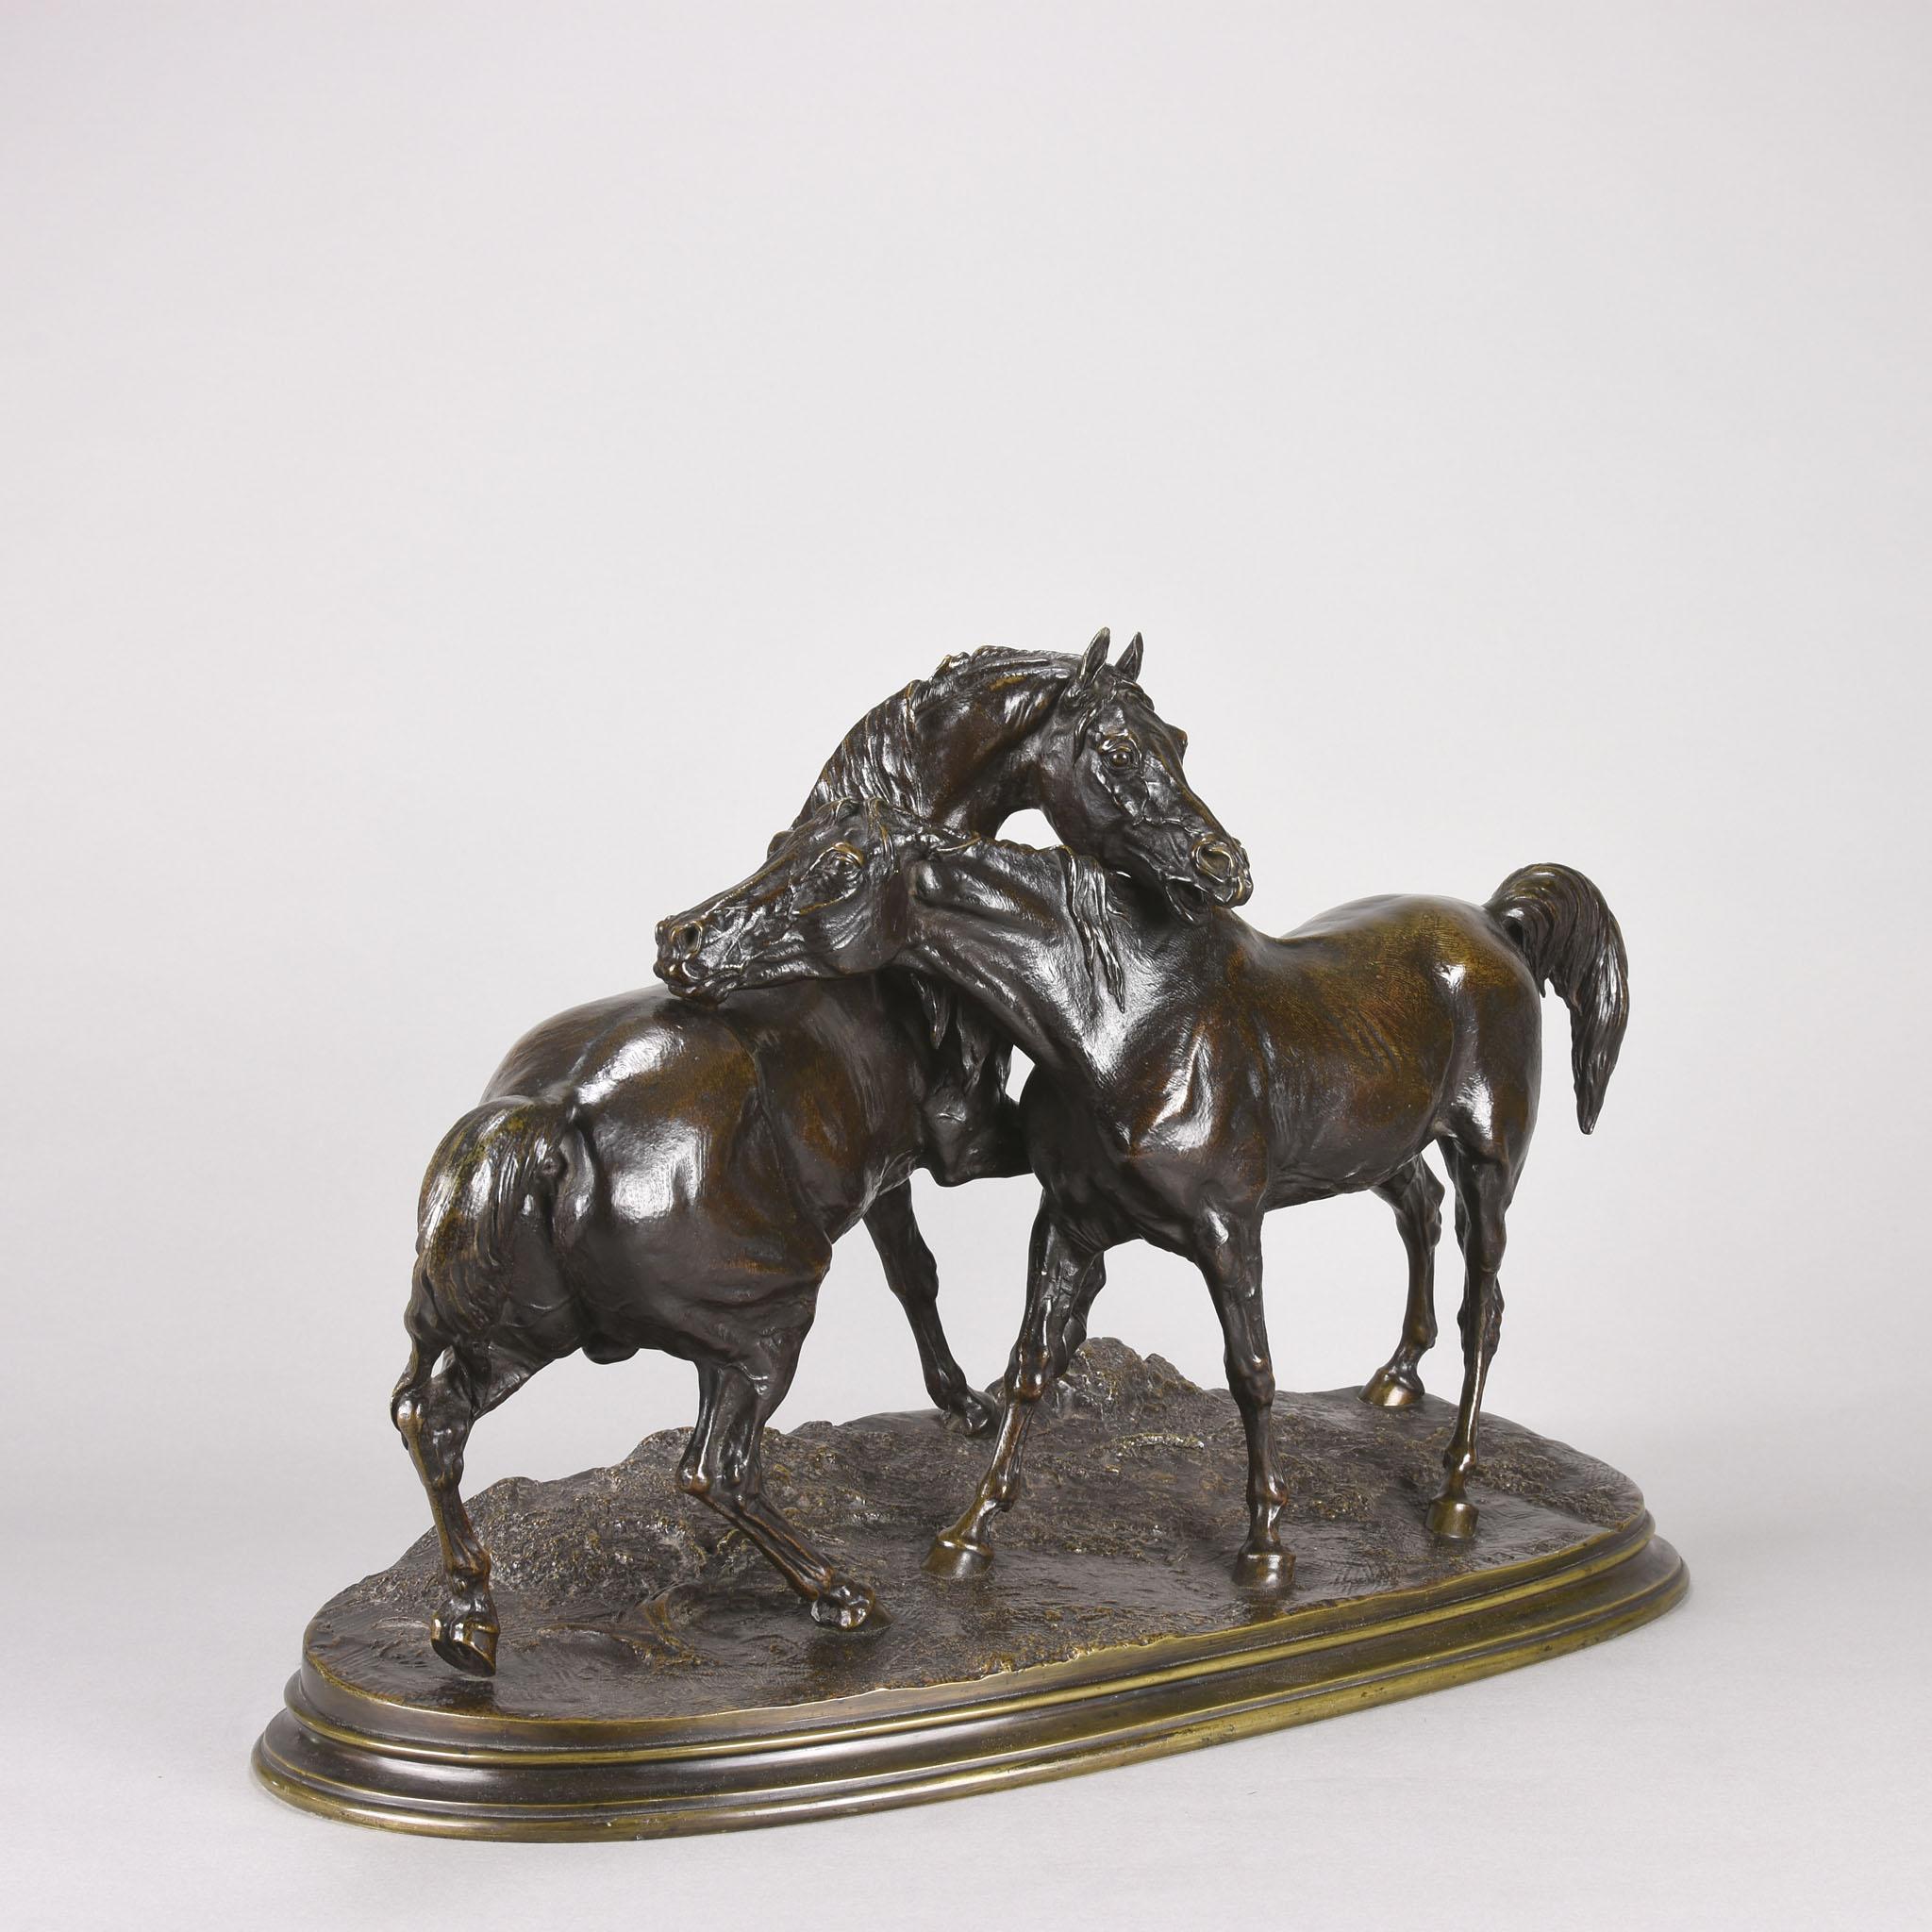 A wonderful mid-19th century animalier bronze cast from the artist’s own workshop, this is a rare early bronze study of an Arab Stallion and Mare from the artist's own foundry (atelier Mêne). Originally entitled “Tachiani et Nedjibe, Arab horses”